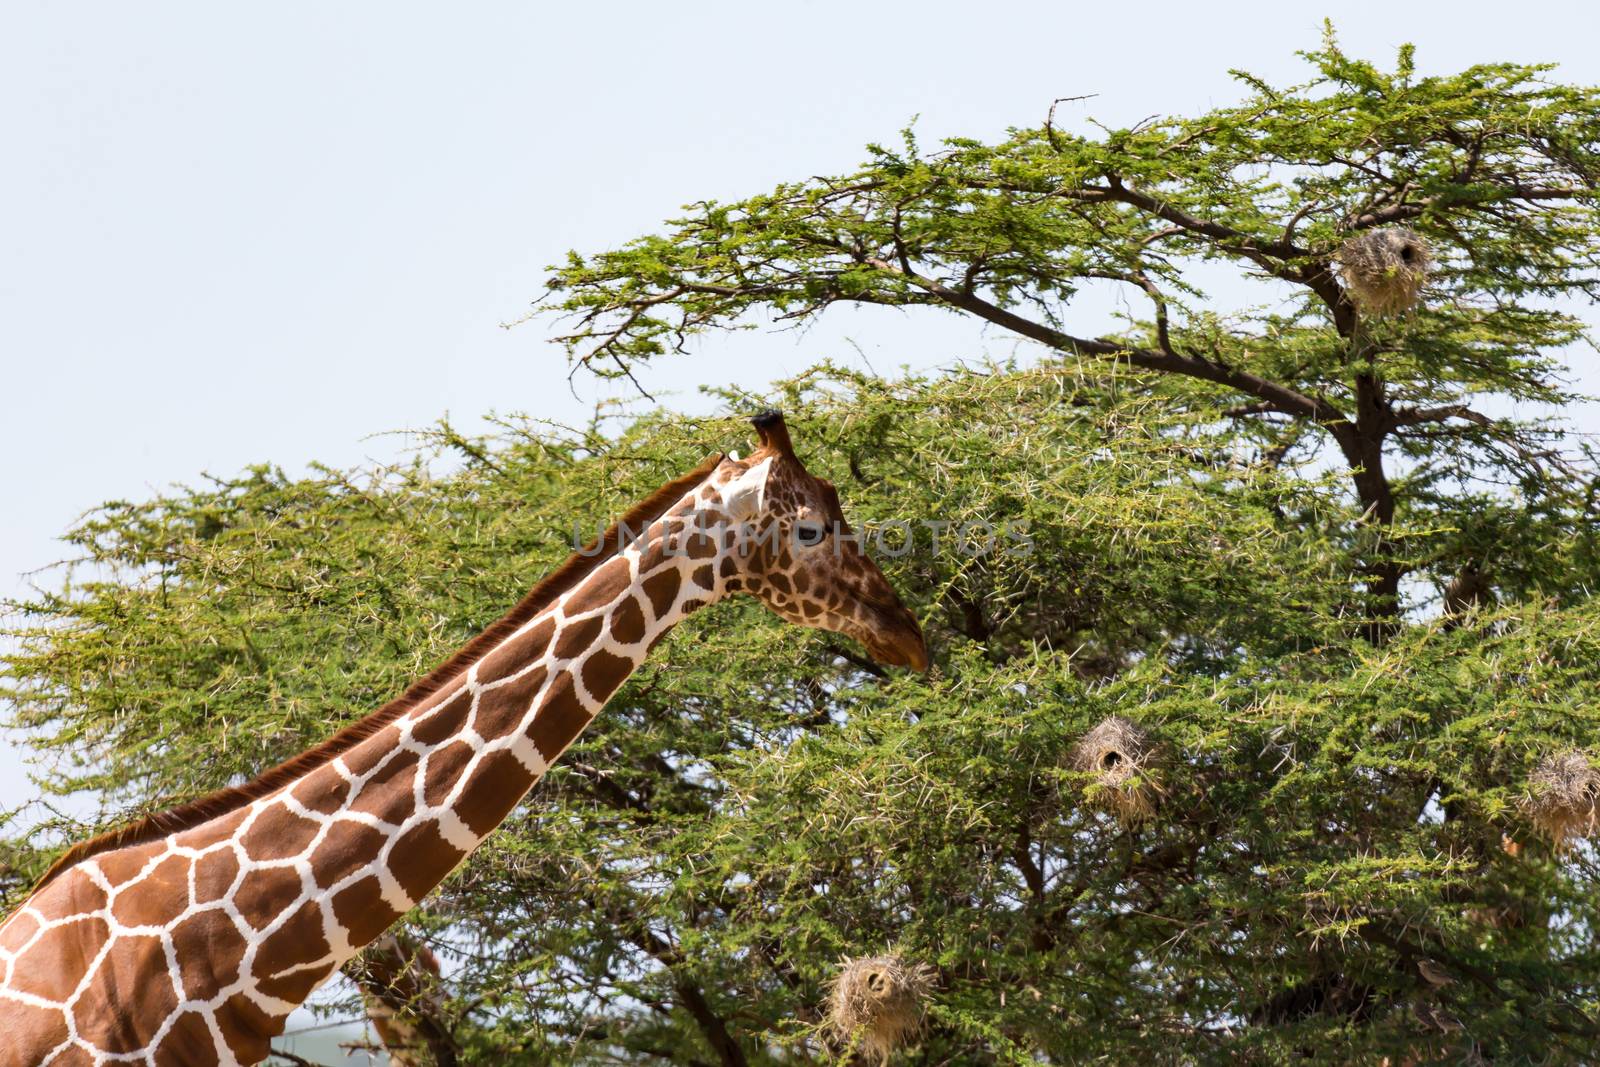 The closeup of a giraffe with many plants in the background